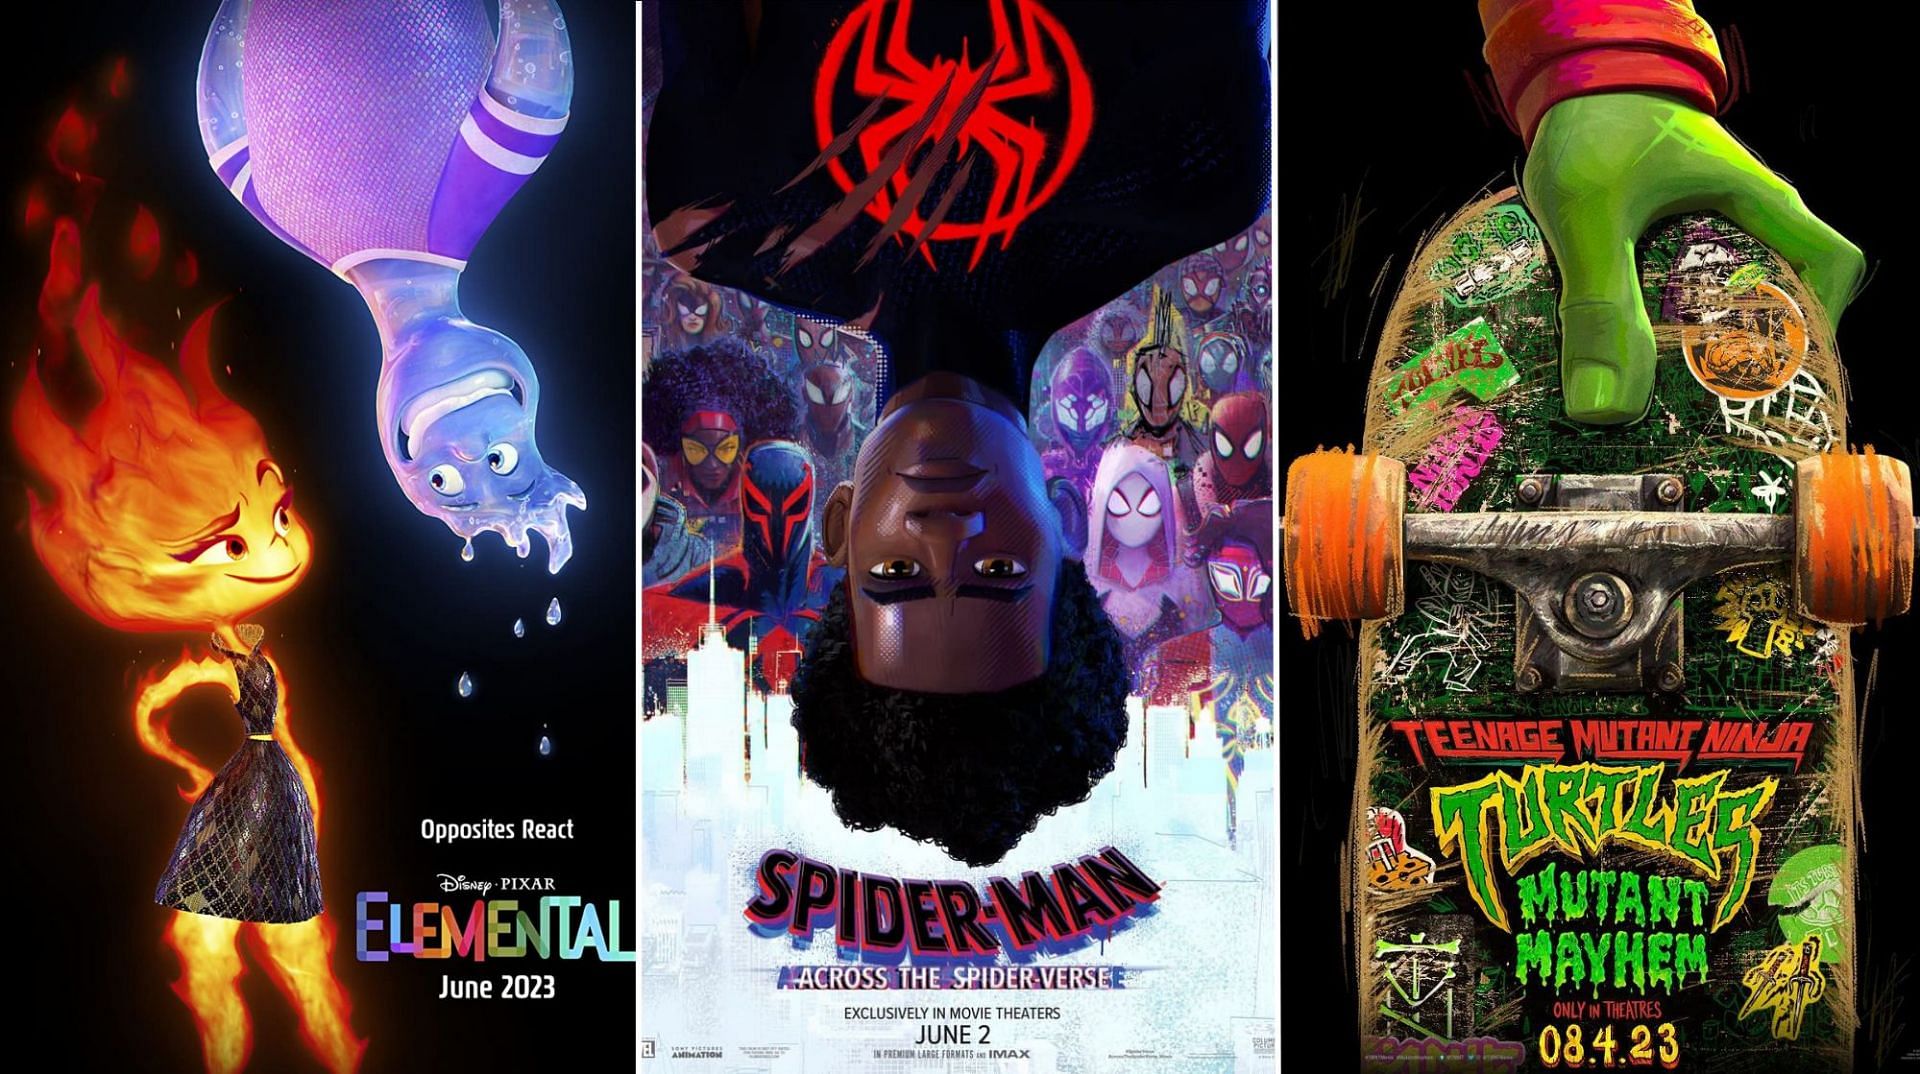 Top 5 animated films releasing in 2023